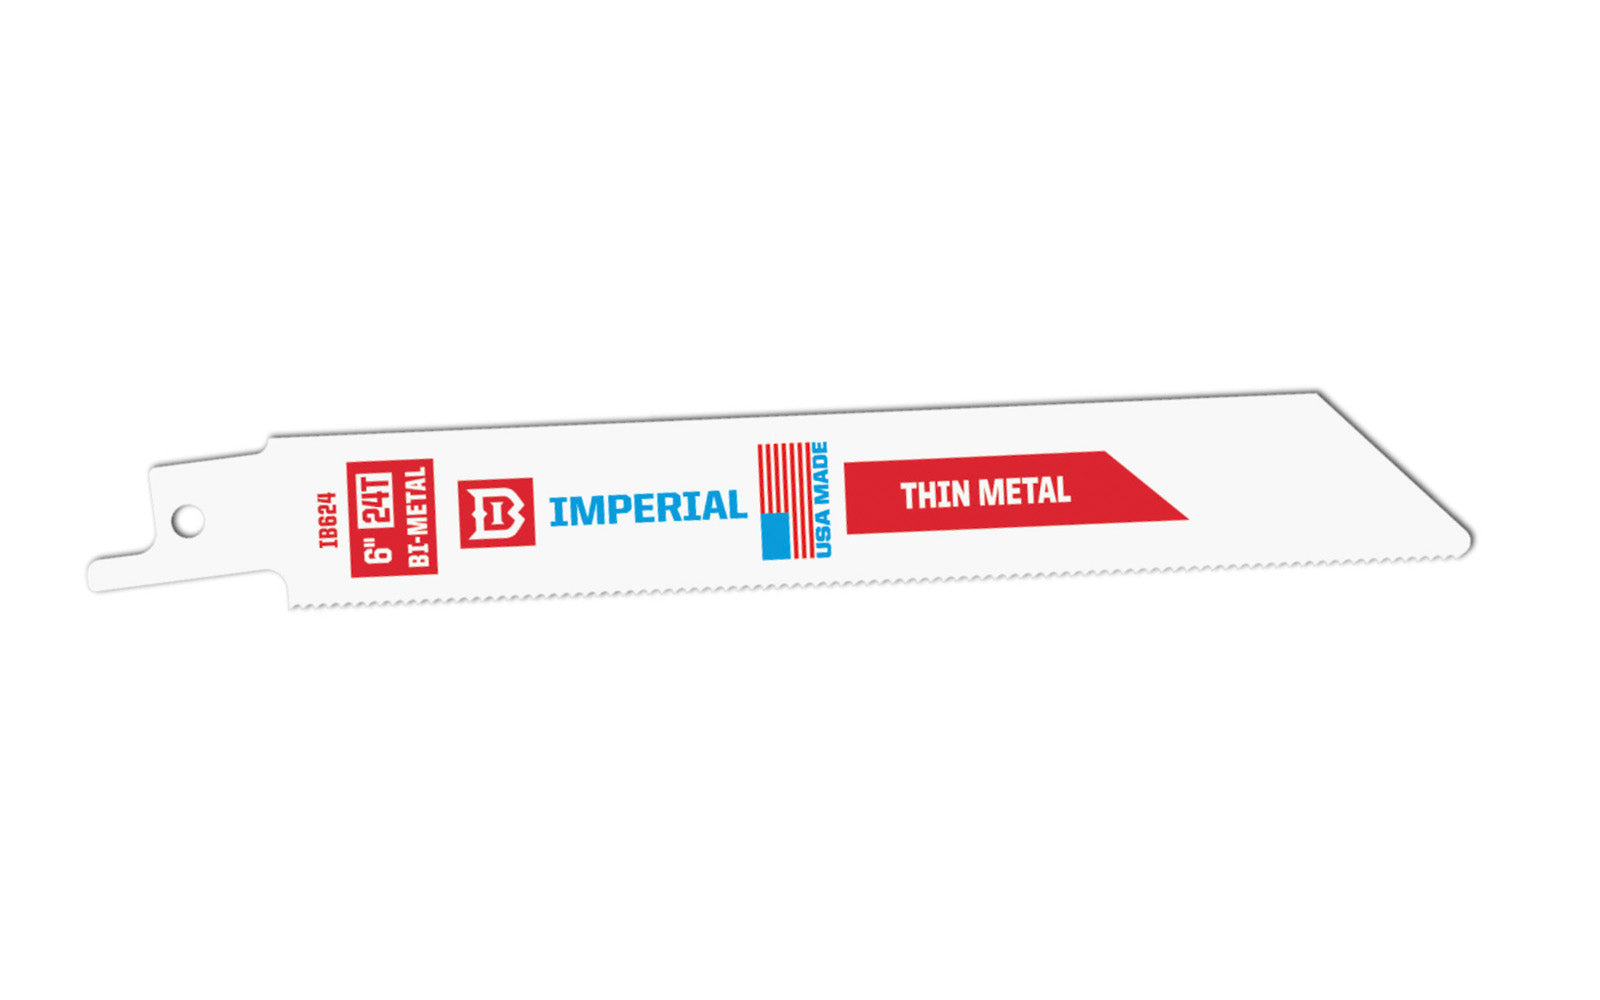 Imperial Blades Standard 6" 24 TPI Thin Metal Reciprocating Blade. Thin .035" kerf  for fast, flexible cuts. Straight blade body for increased beam strength. Recommended applications: Copper Pipe, Thin Metal (< 1/8″). Sold as 1 blade. Model IB624-B. Bi-Metal blade. Made in USA.   